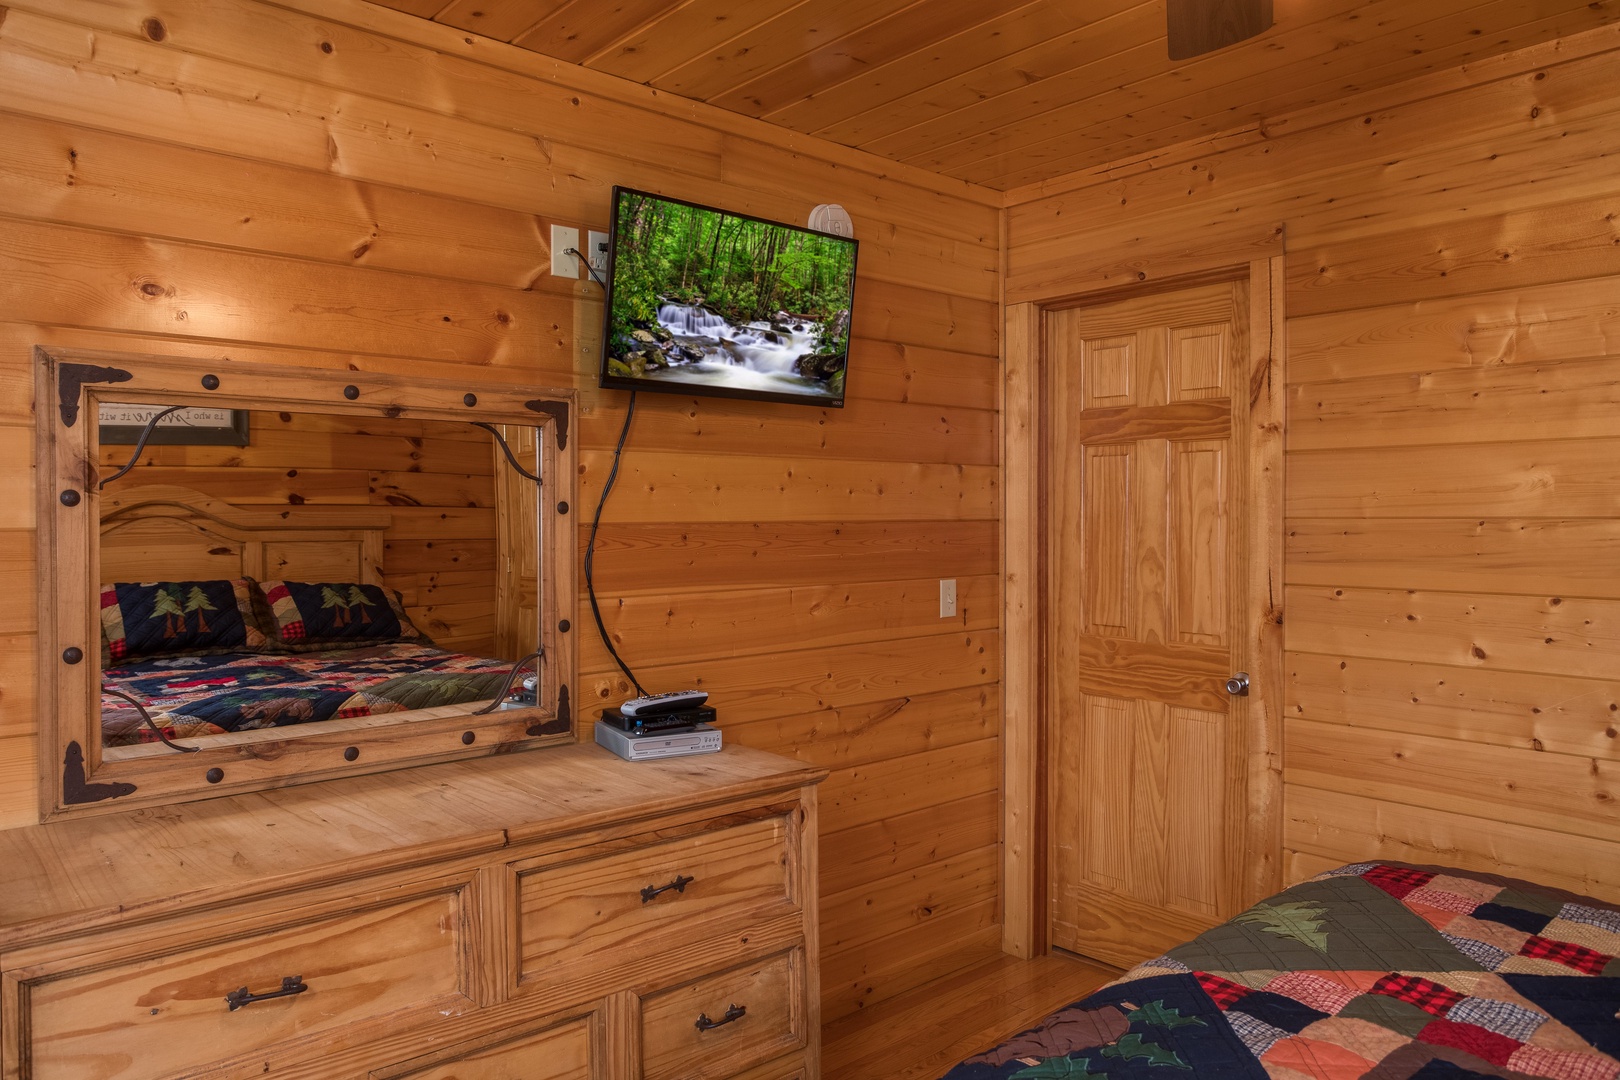 Dresser, mirror, and TV in a bedroom Kick Back & Relax! A 4 bedroom cabin rental located in Pigeon Forge